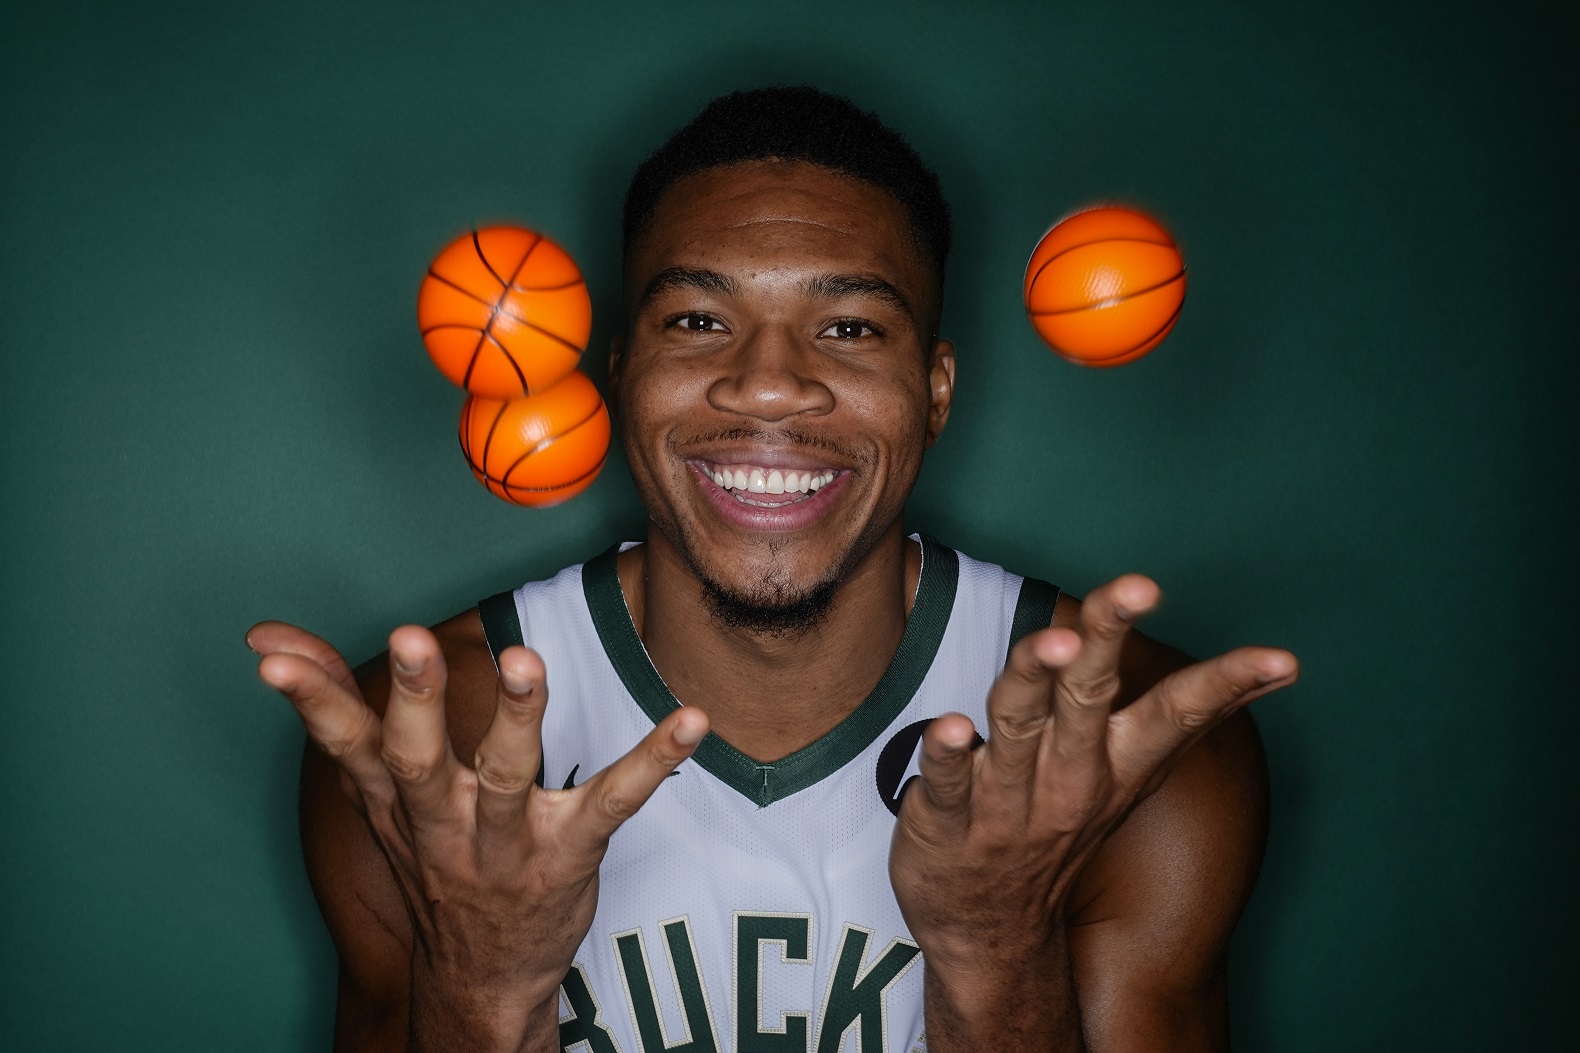 Antetokounmpo scores 37 points, as Bucks beat Magic for 6th straight victory